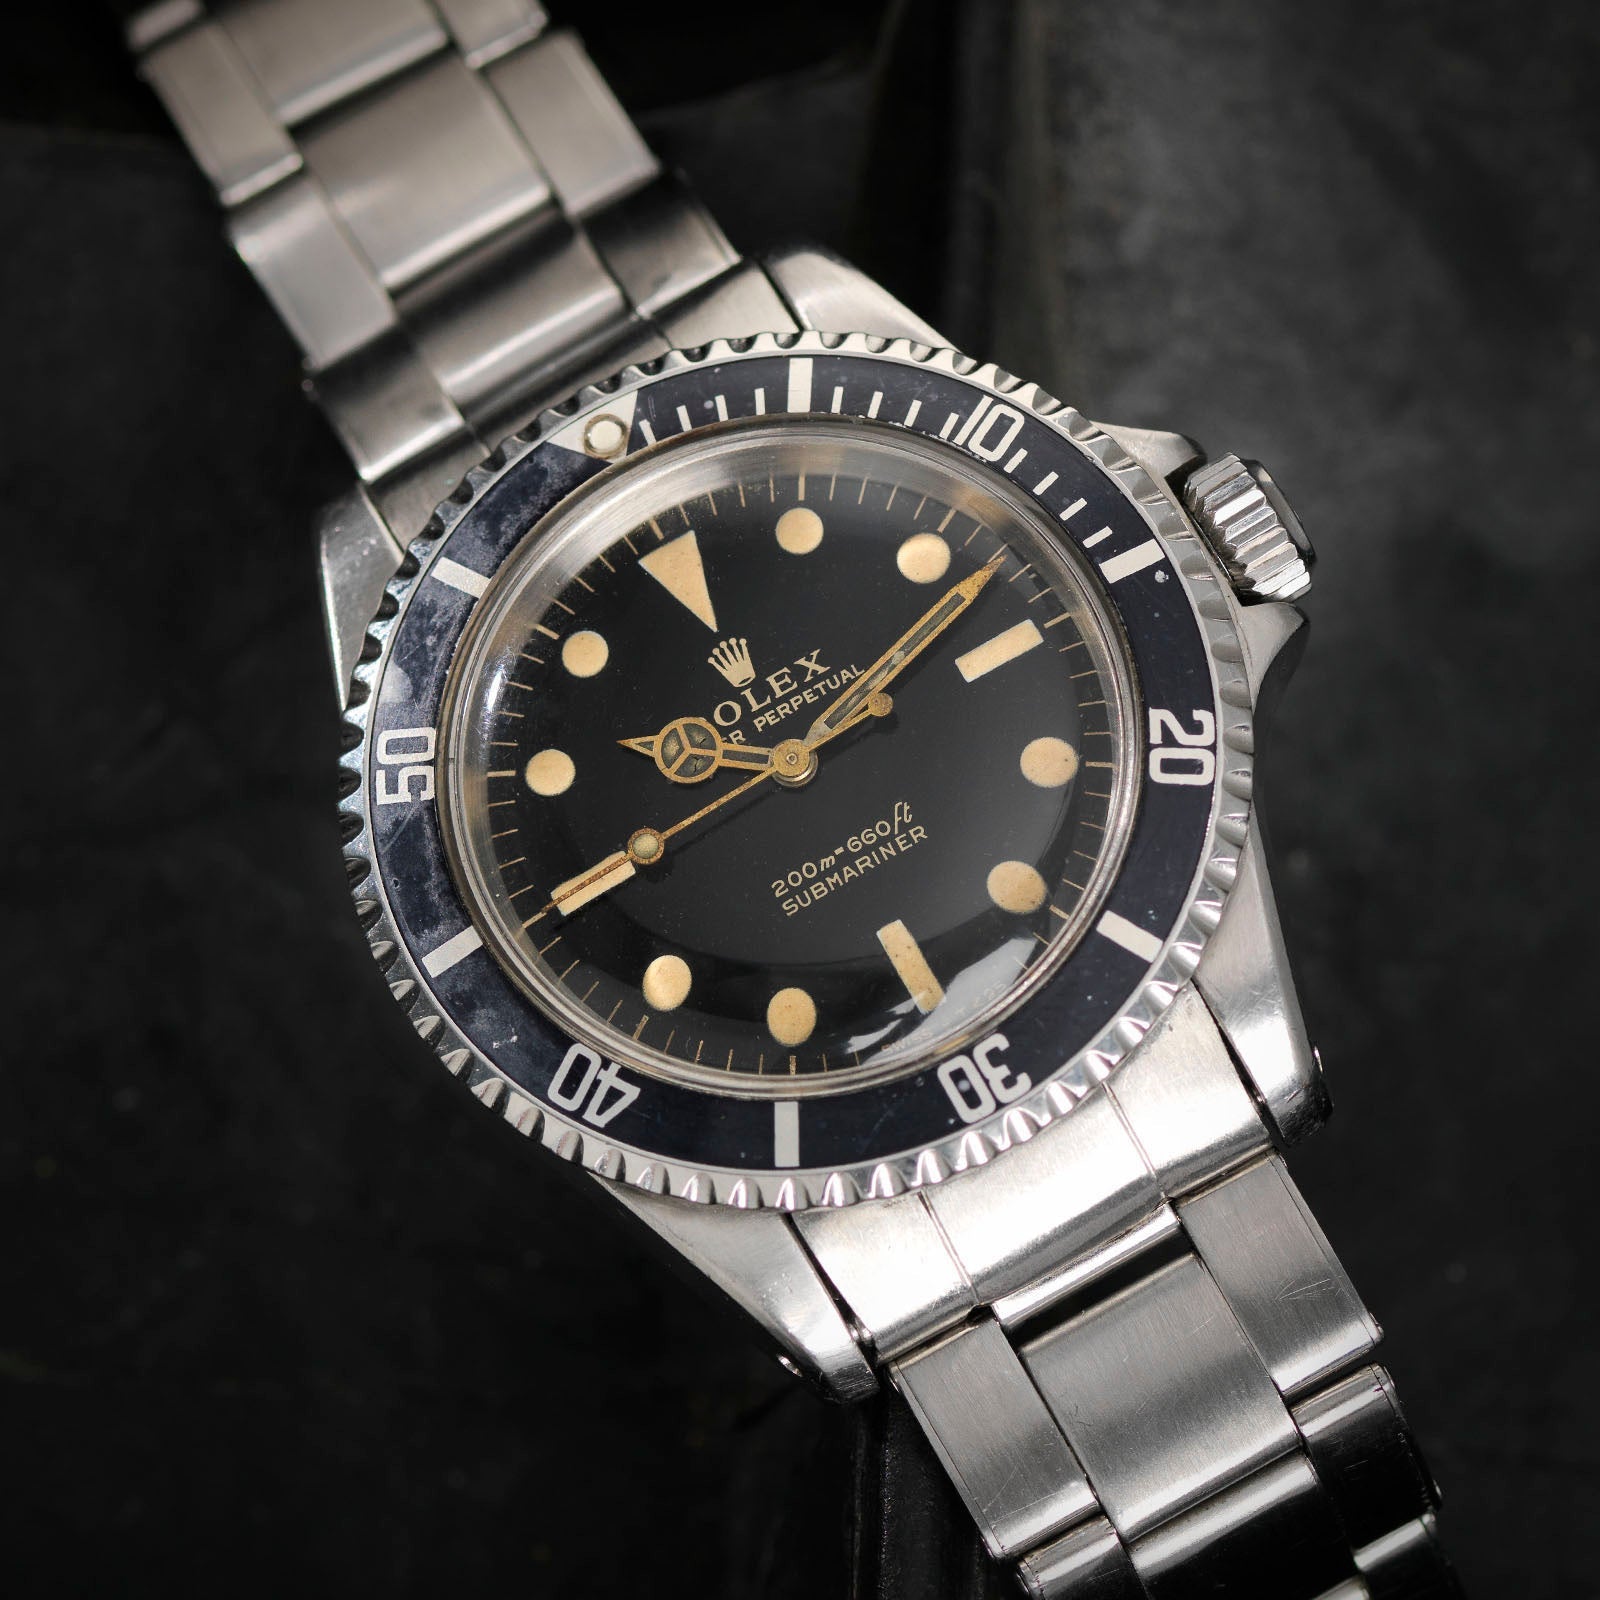 The South Pacific Rolex 5513